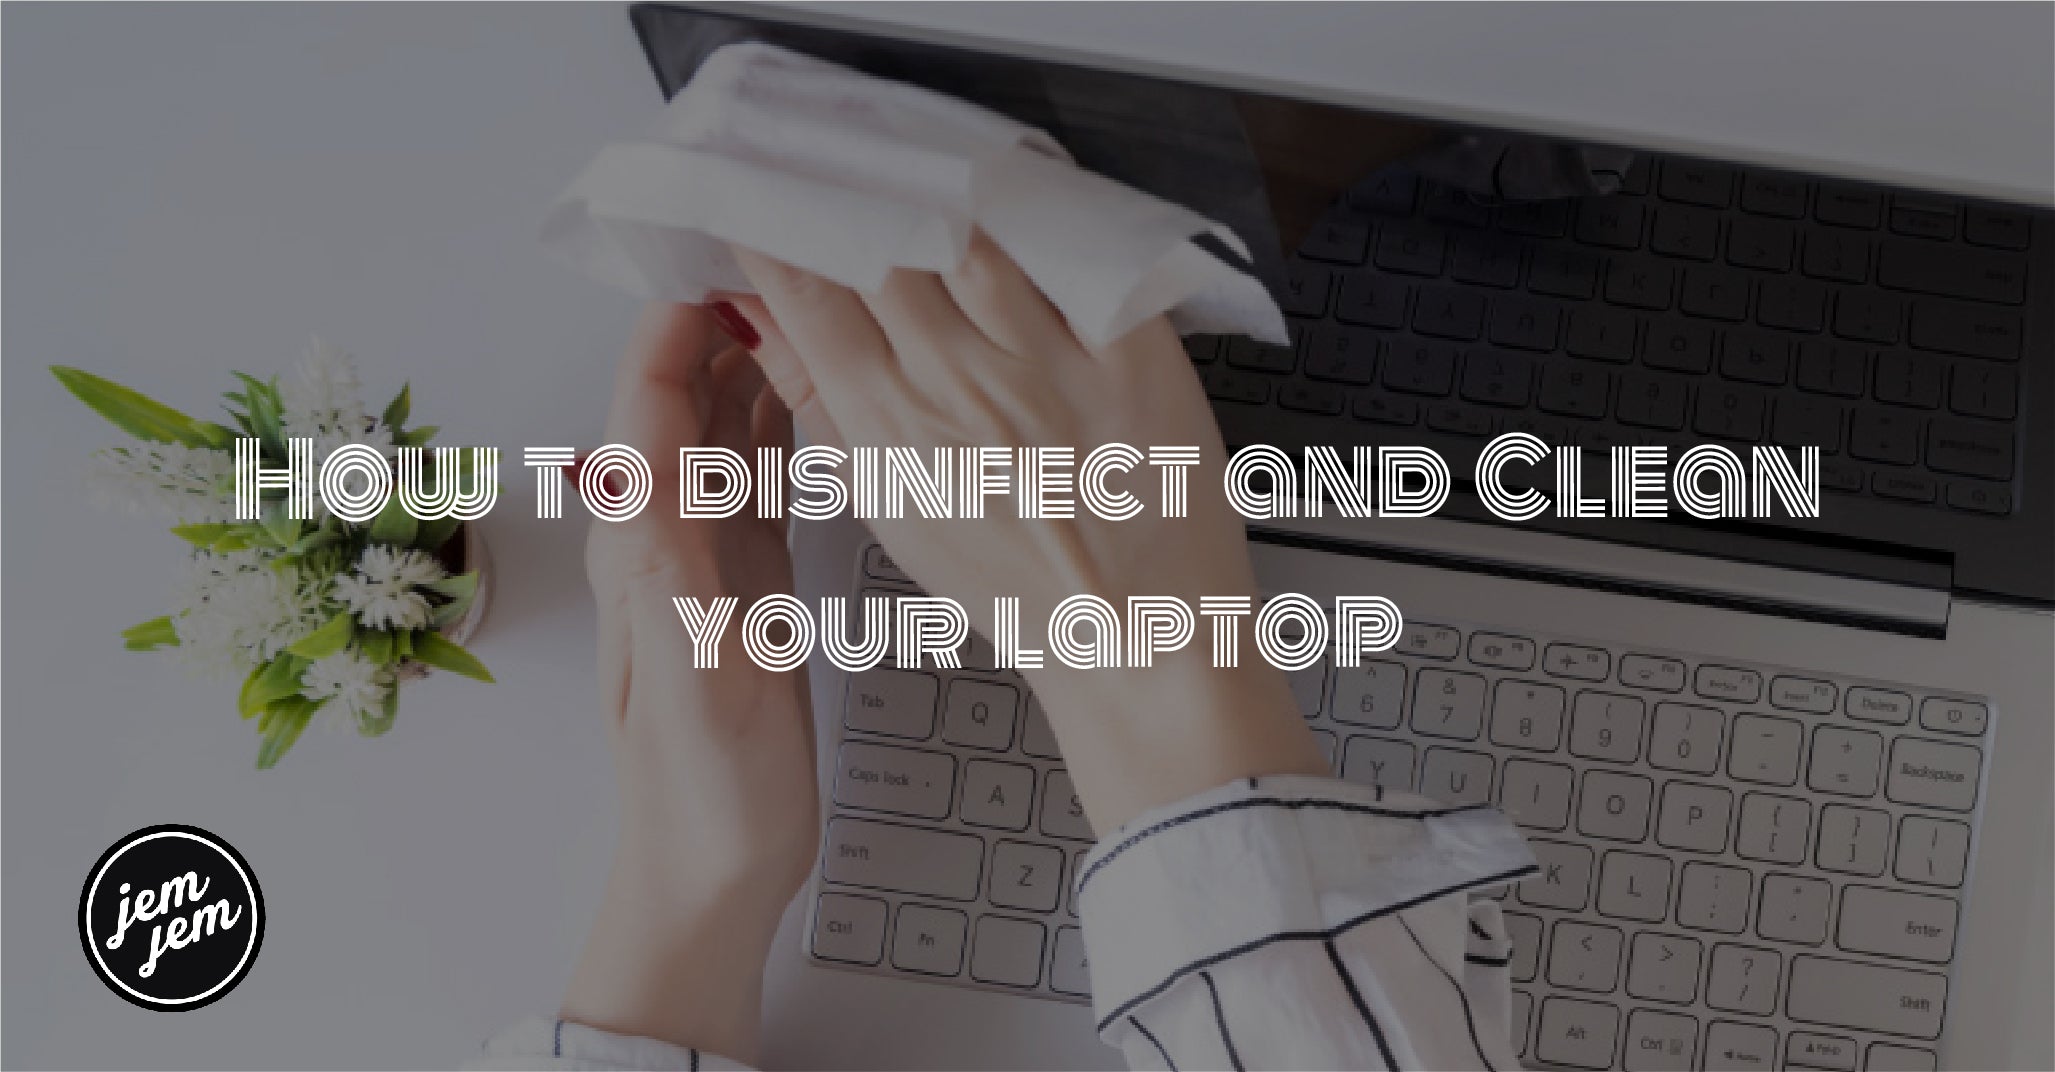 How to disinfect and Clean your laptop